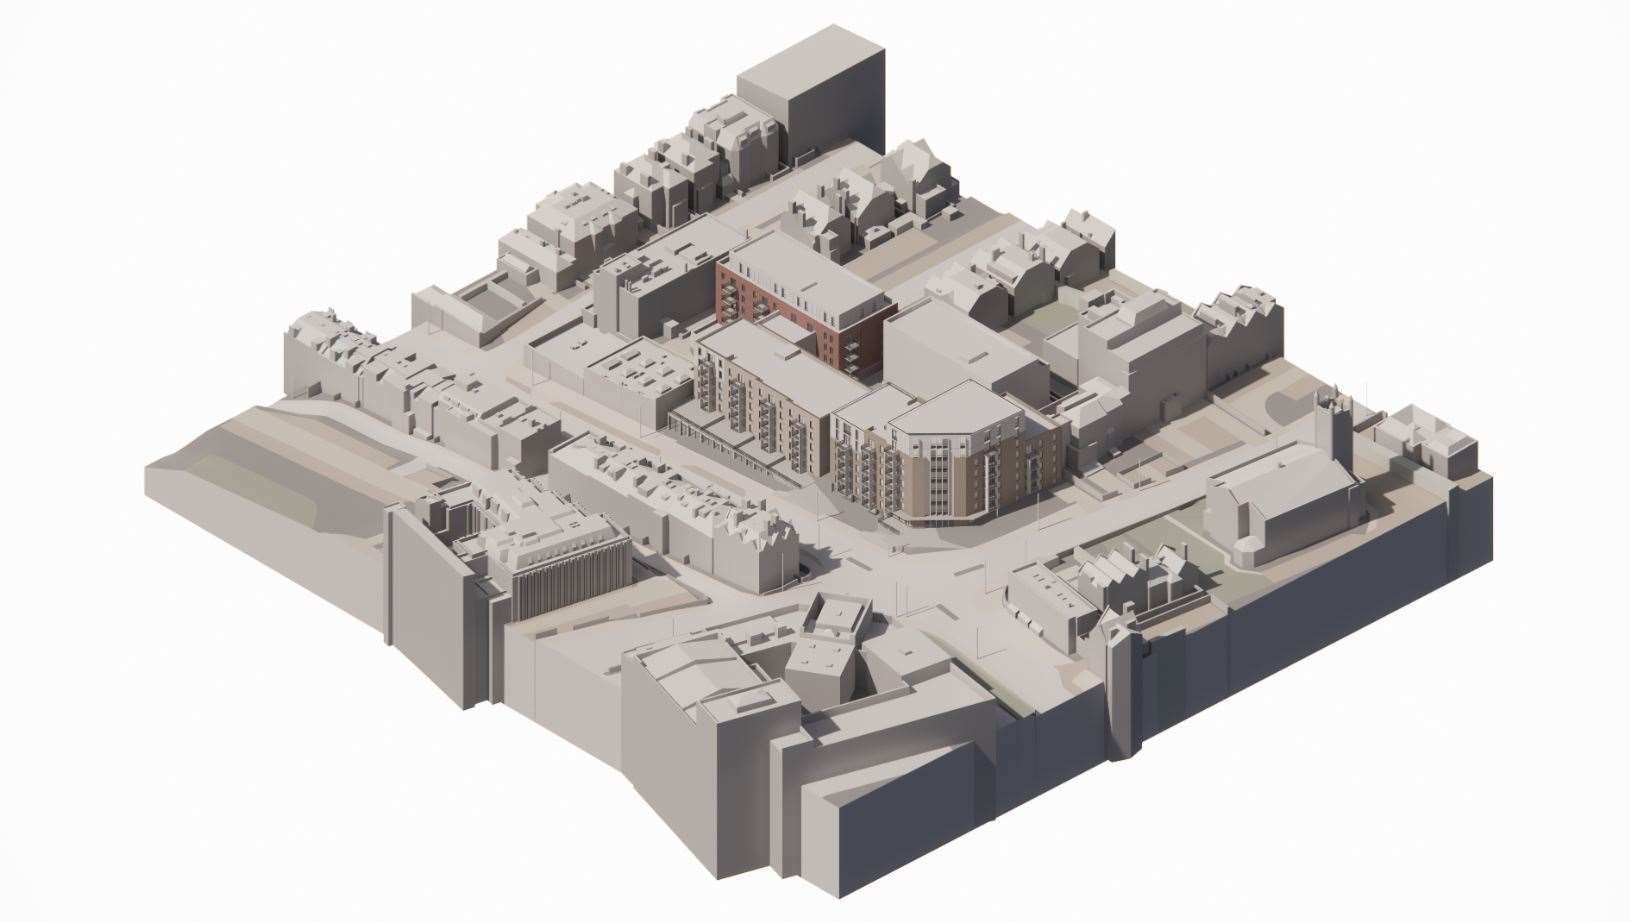 A view of the RVG proposals for the former ABC cinema site in Tunbridge Wells (55923735)